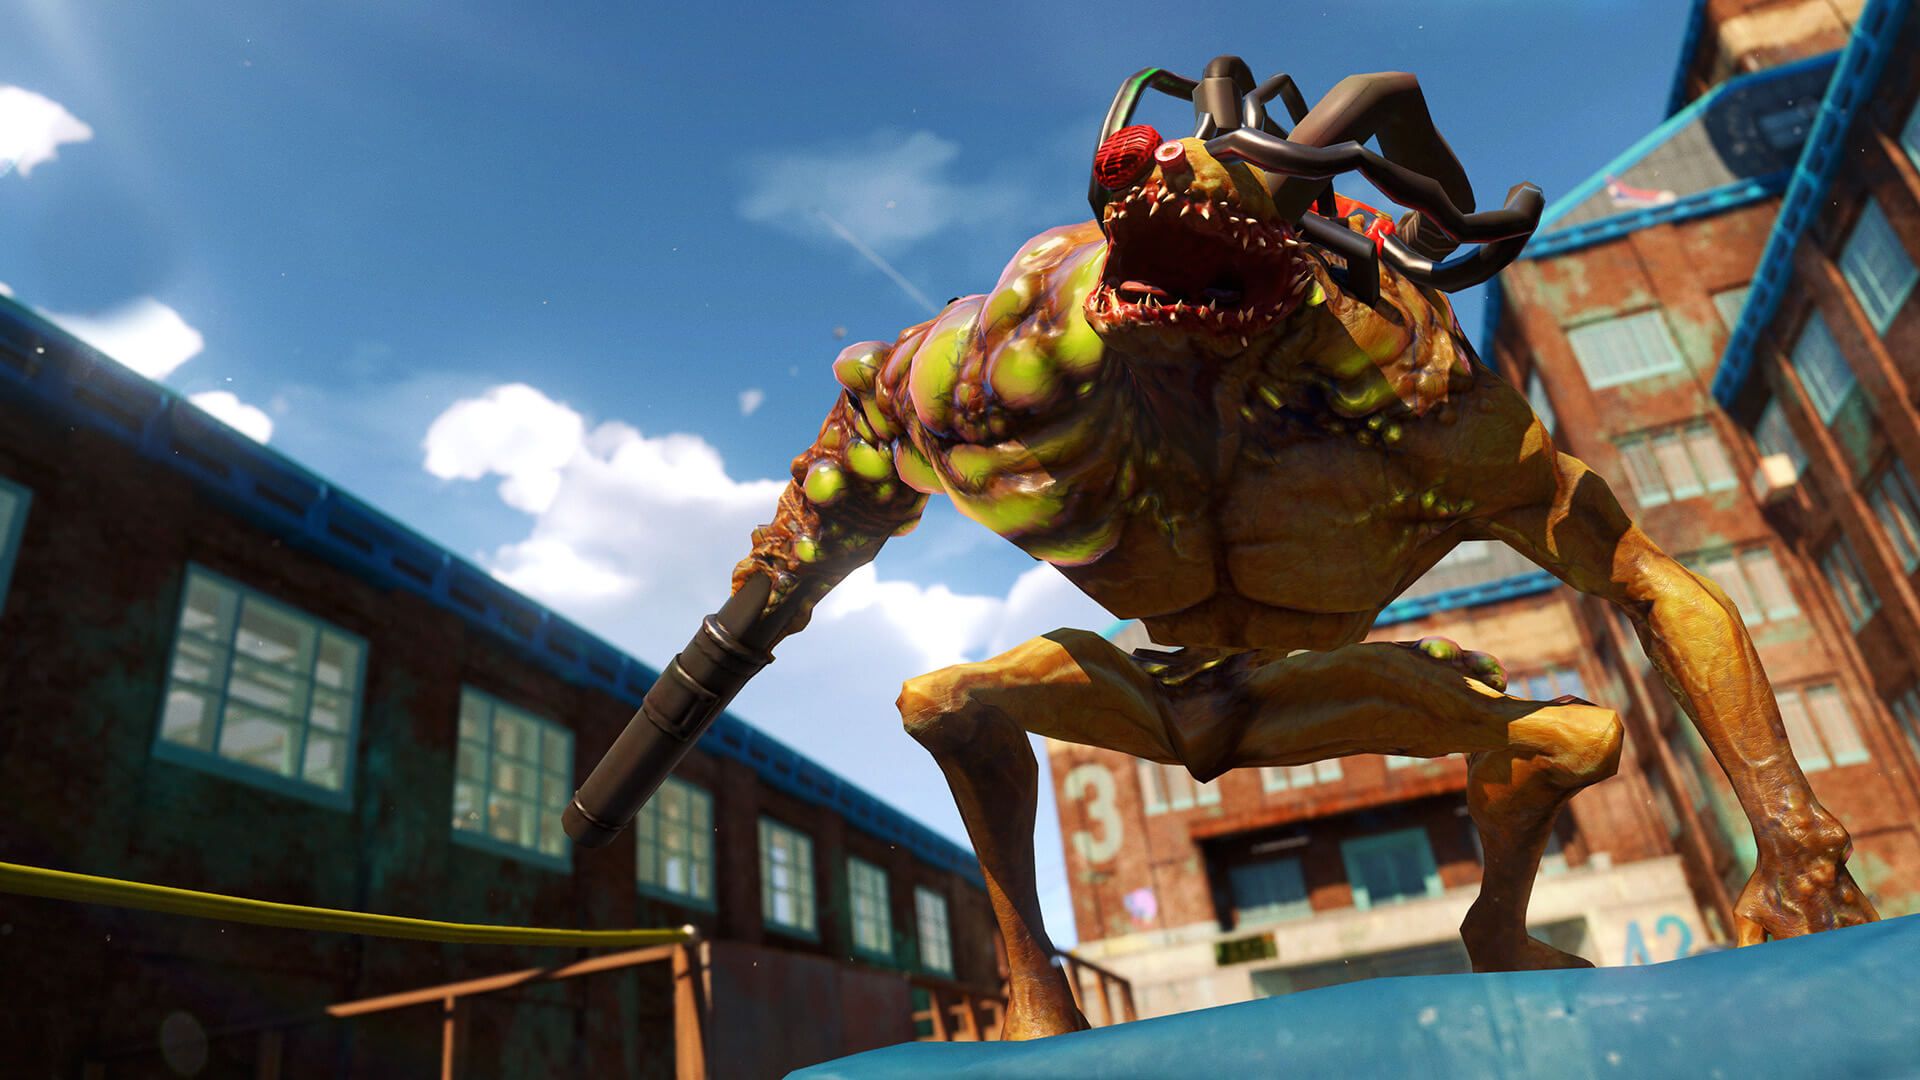 Sunset Overdrive' Trailer Takes Gamers On A Tour Of The Game's Cannon Fodder